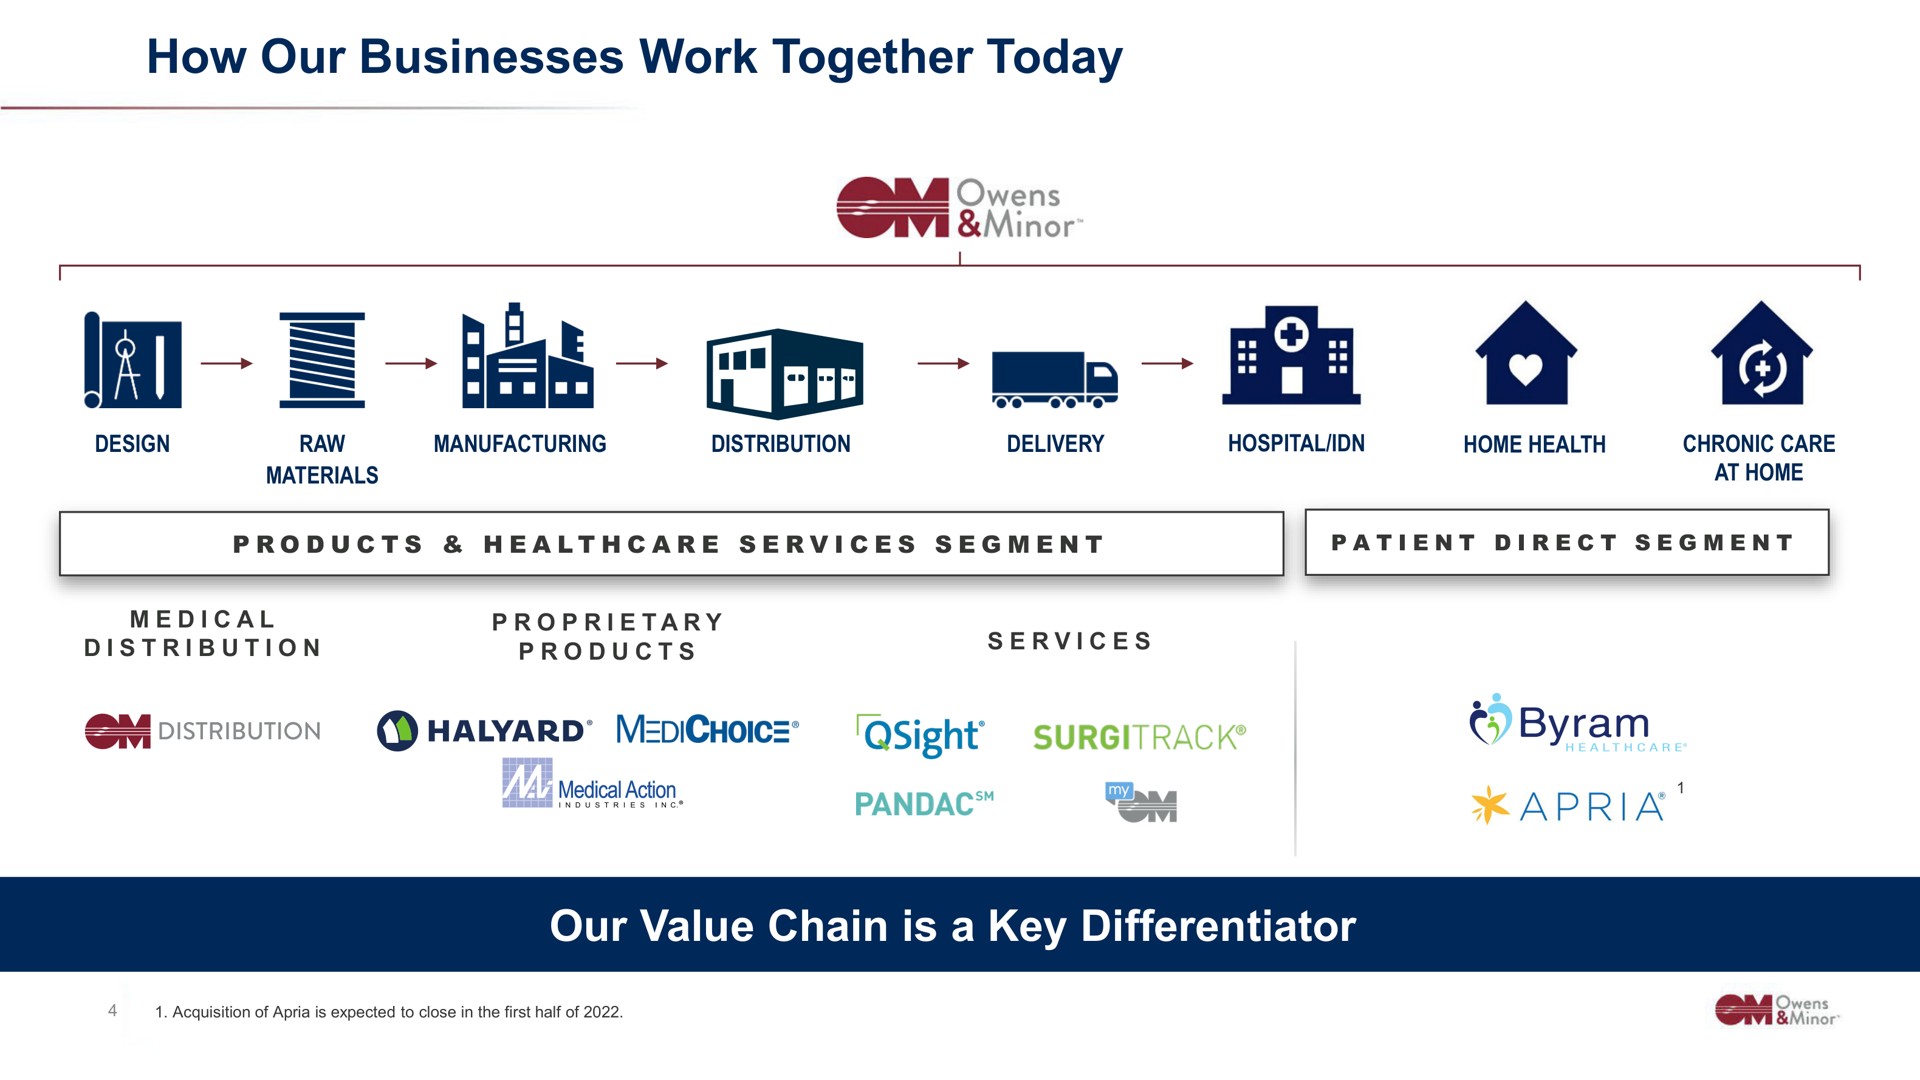 how our businesses work together today our value chain is a key differentiator hes halyard medical action | Owens&Minor